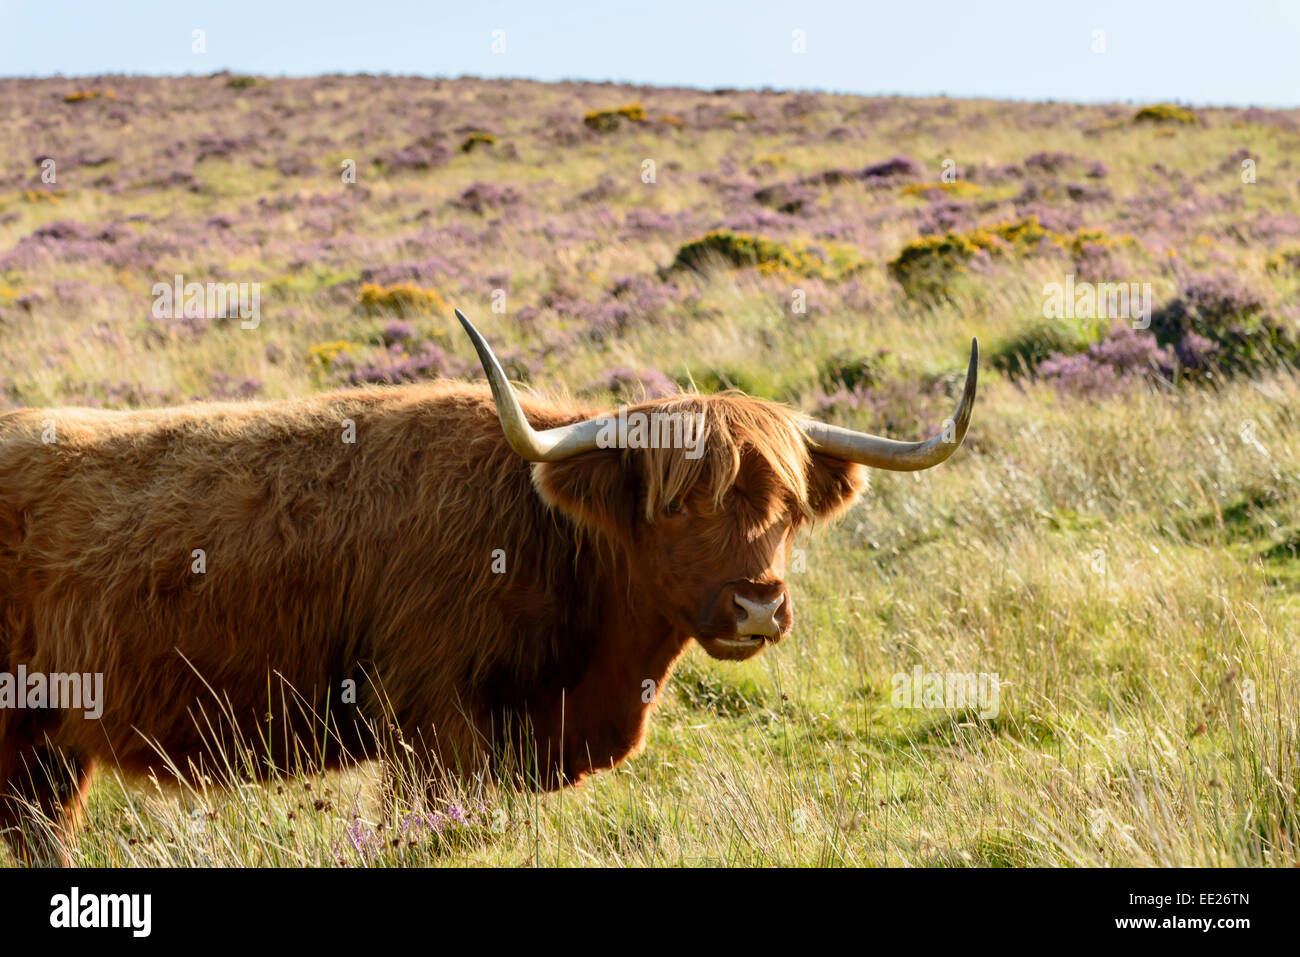 long horns of hairy cattle grazing among heather bush in the moor Stock Photo